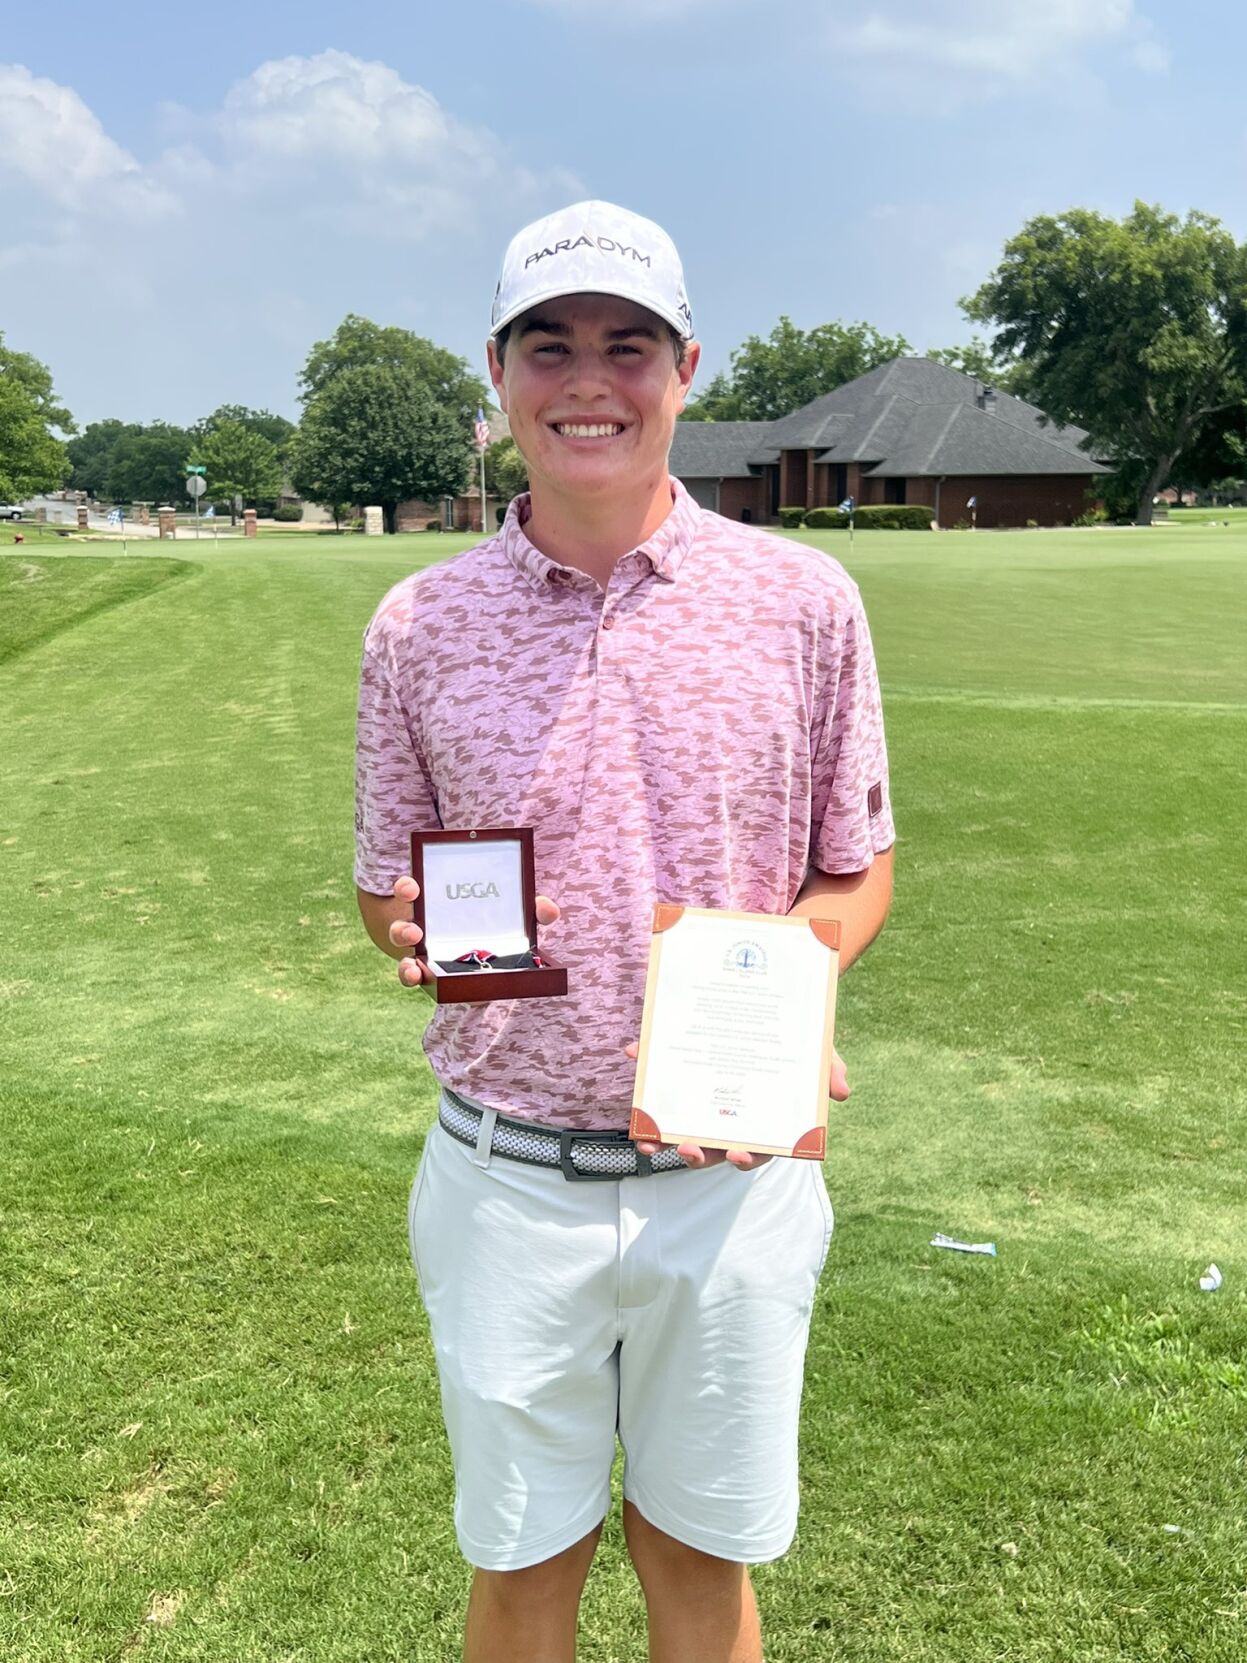 Midways Null fires his way to qualifying spot for US Junior Amateur